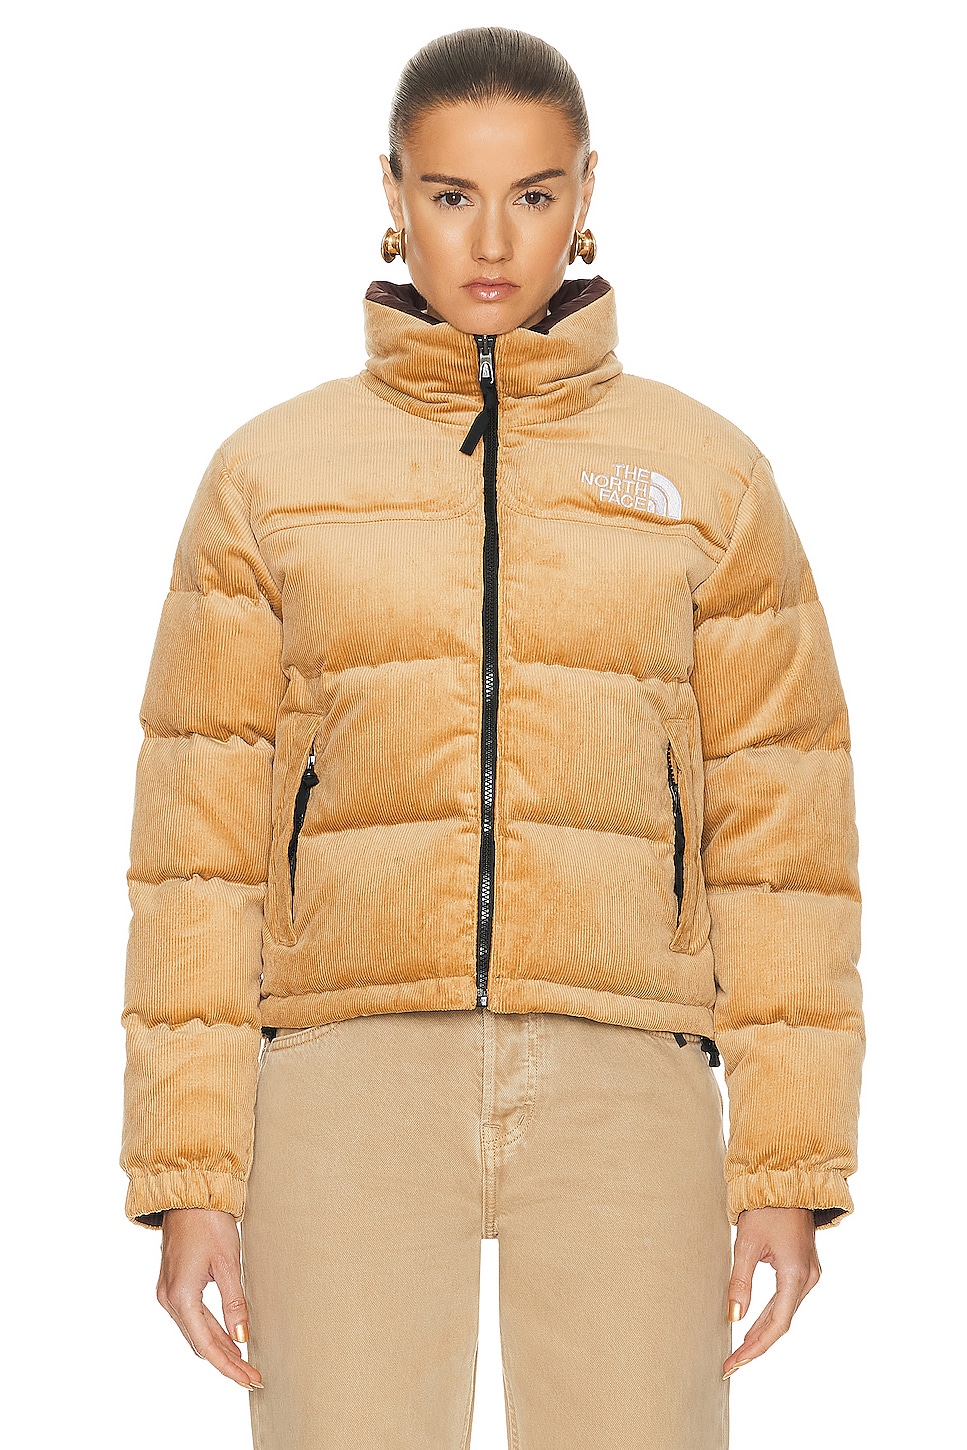 Image 1 of The North Face 92 Reversible Nuptse Jacket in Almond Butter & Coal Brown